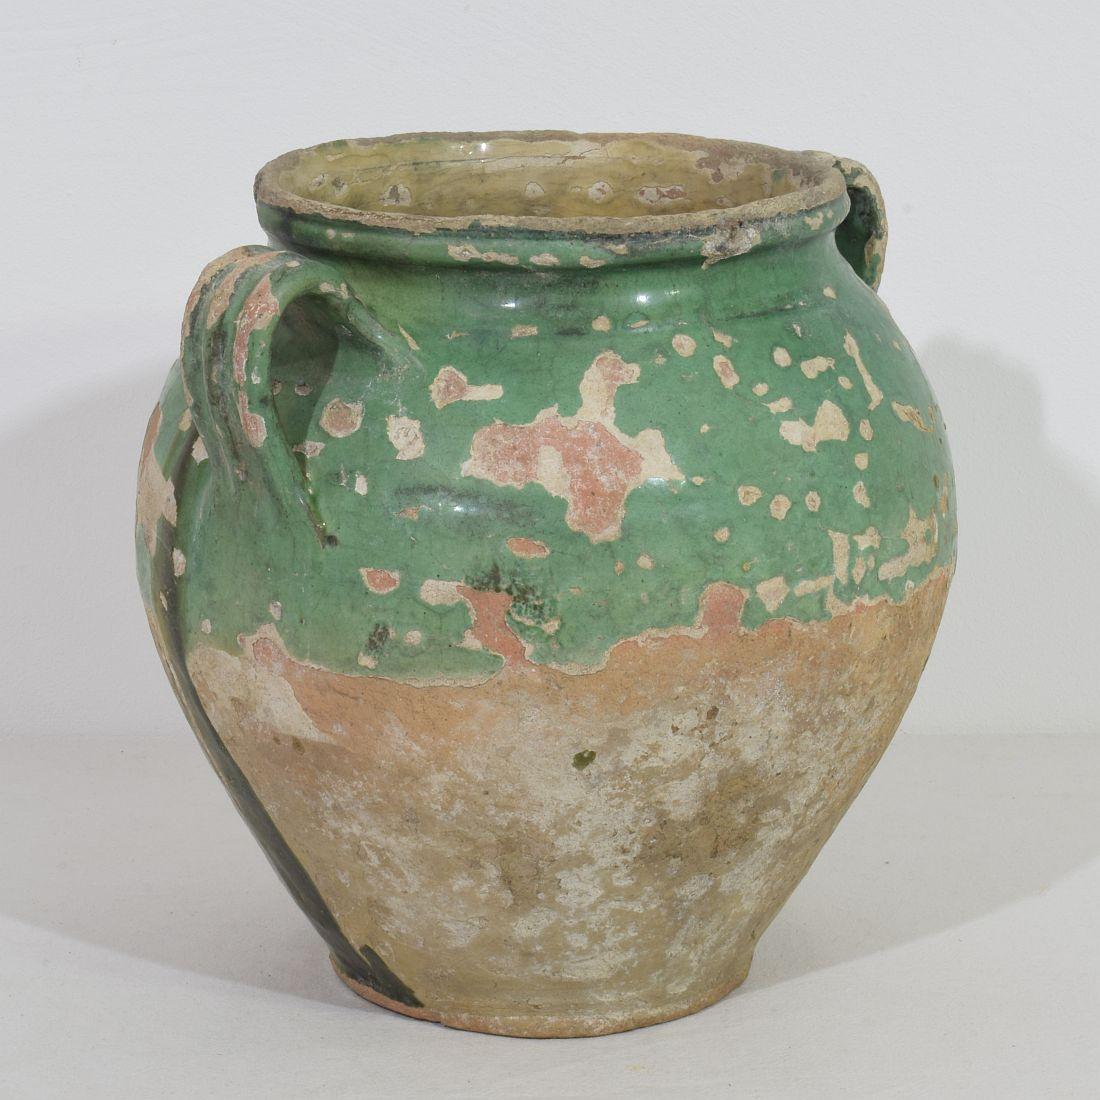 Beautiful weathered confit jar. With green glaze they are extremely rare. Confit jars were used primarily in the South of France for the preservation of meats such as duck or goose for dishes such as cassoulet or foie gras. The bottom halves were